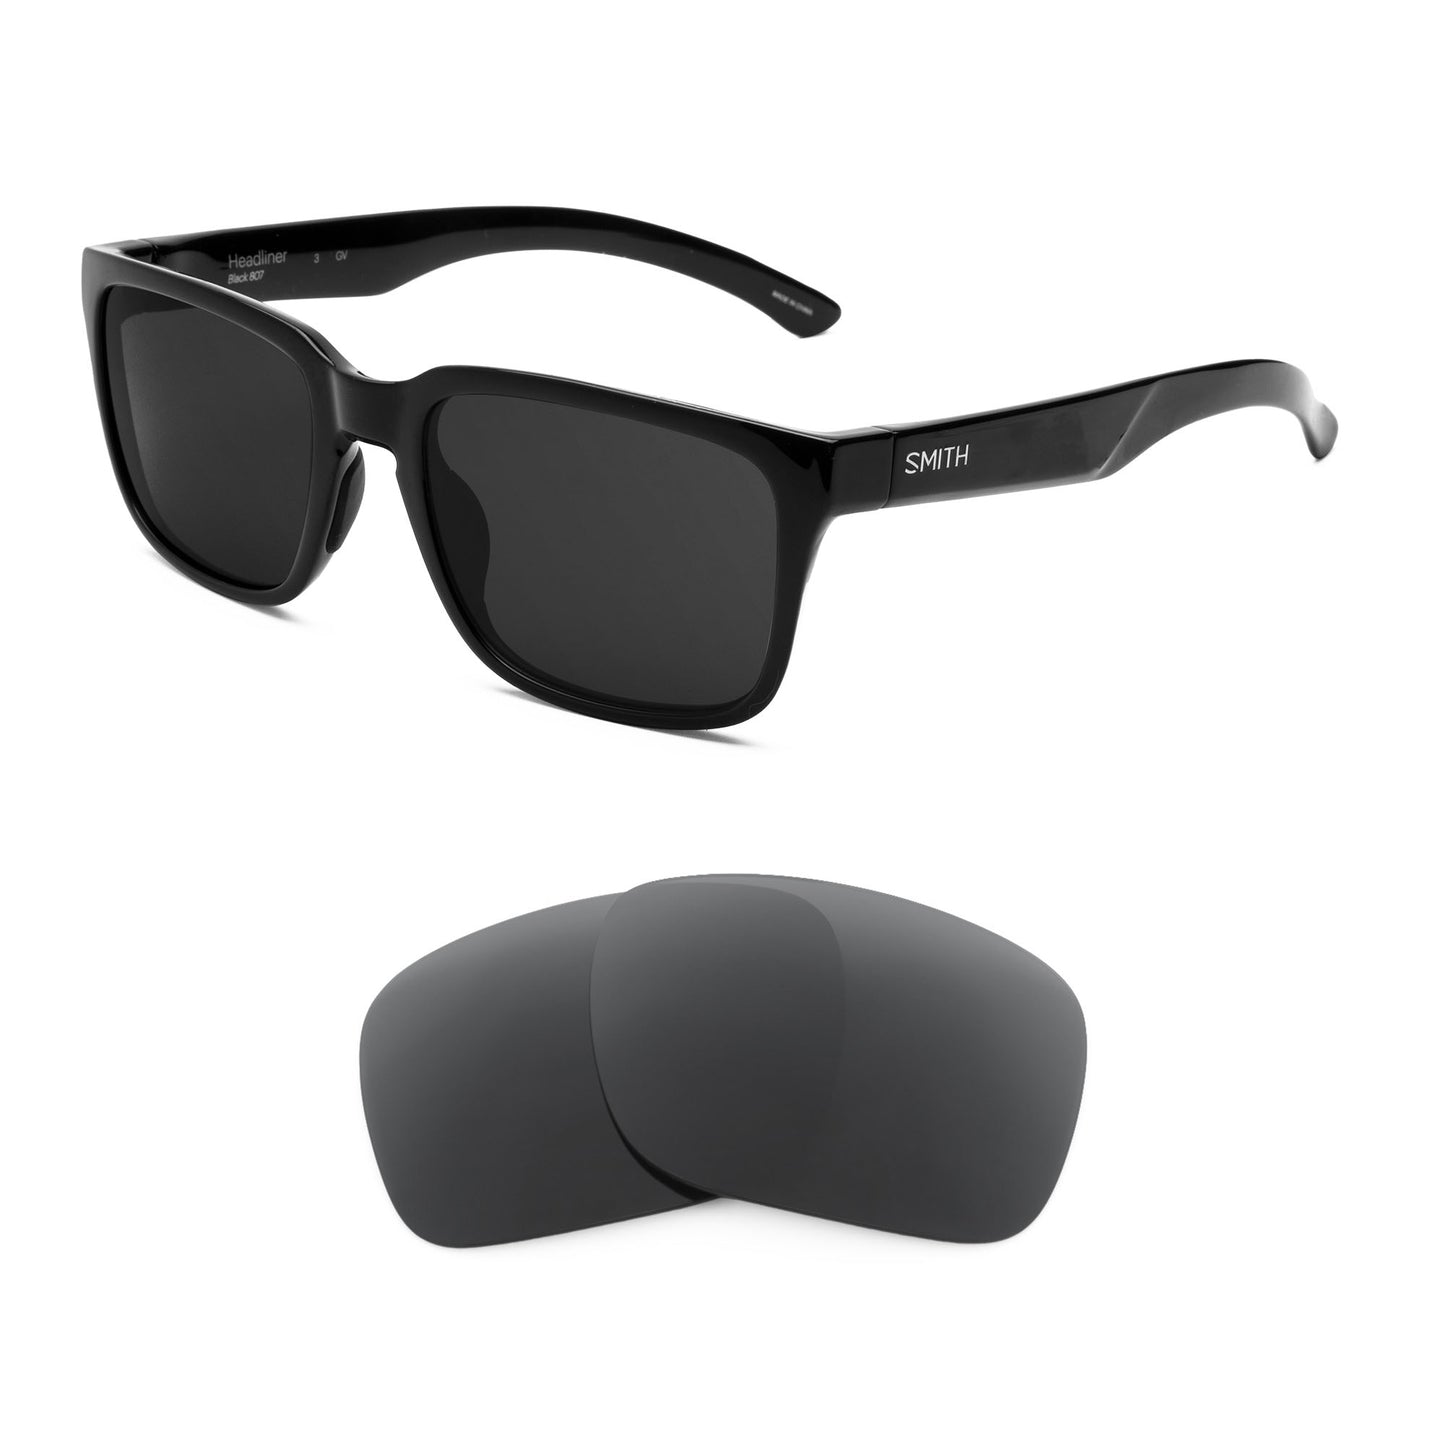 Smith Headliner sunglasses with replacement lenses